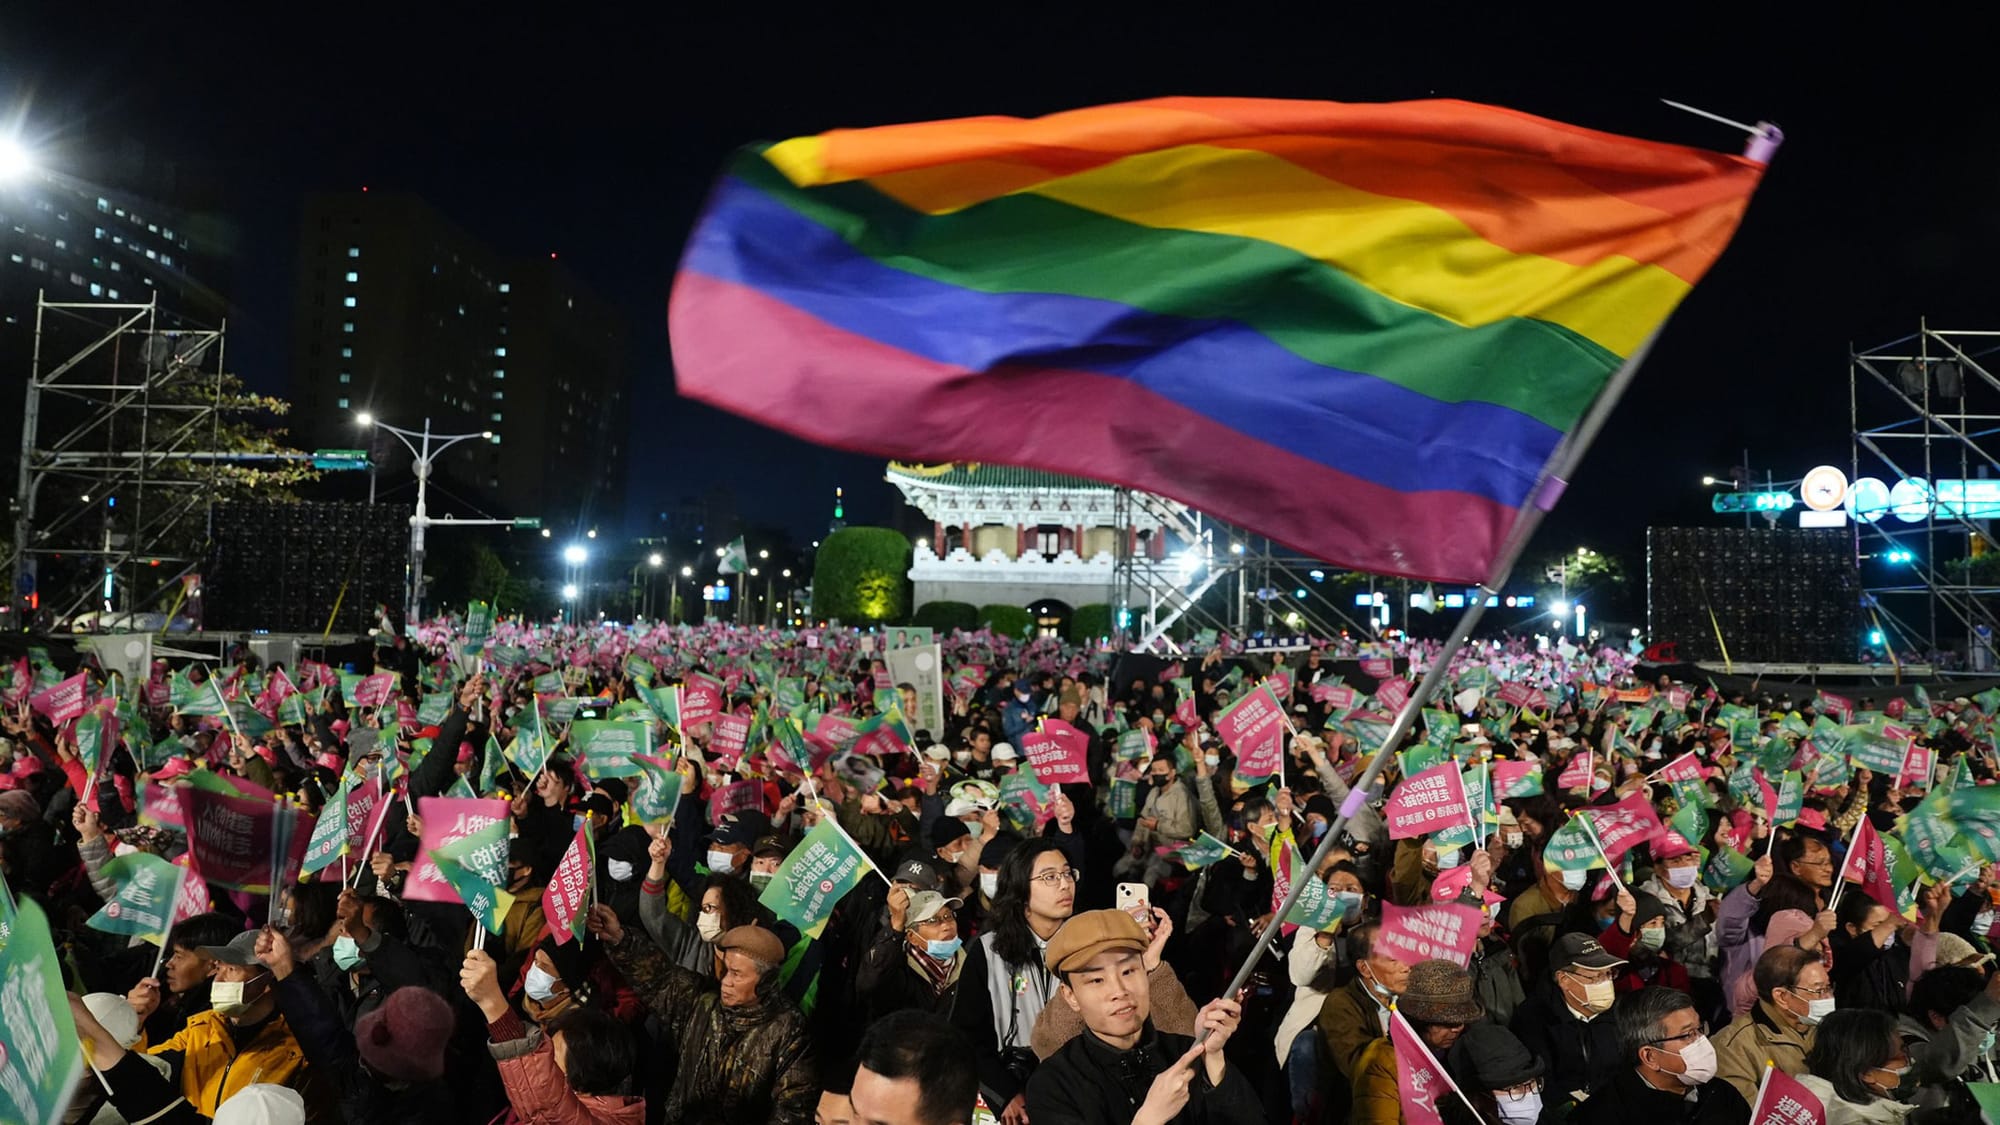 A huge pride flag unfurled over a a big crowd of DPP supporters at a rally in Taiwan